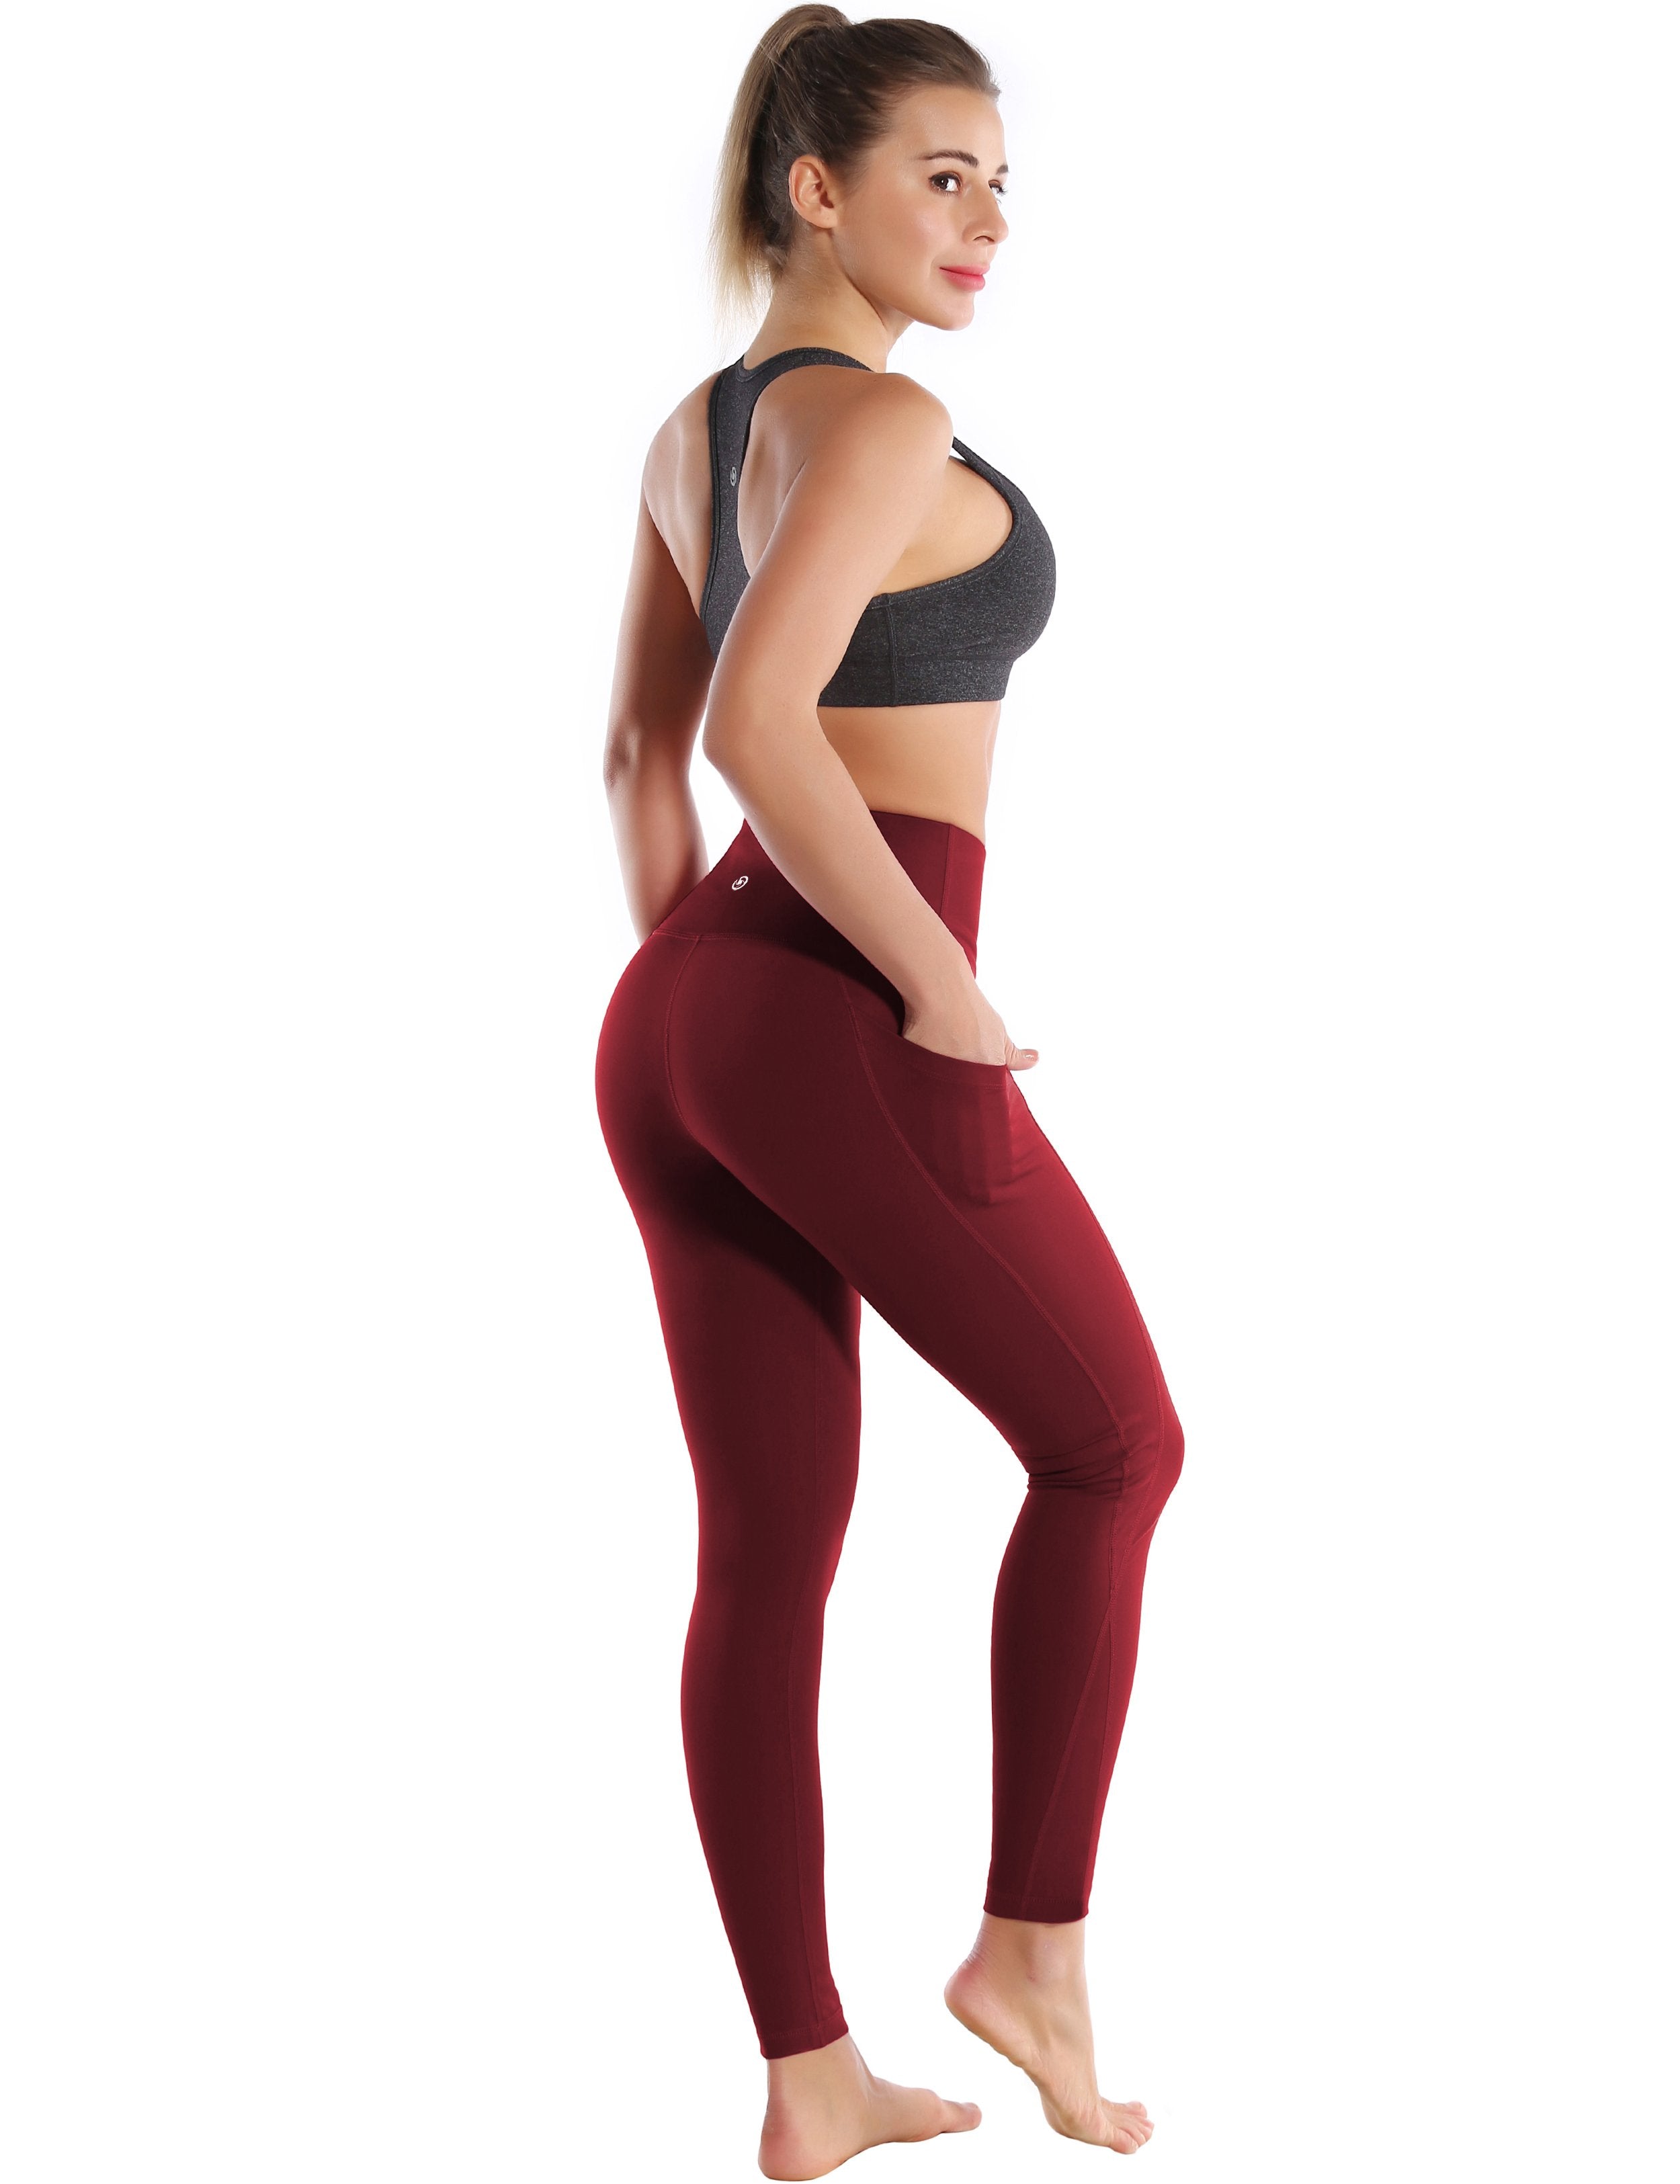 High Waist Side Pockets Jogging Pants cherryred 75% Nylon, 25% Spandex Fabric doesn't attract lint easily 4-way stretch No see-through Moisture-wicking Tummy control Inner pocket